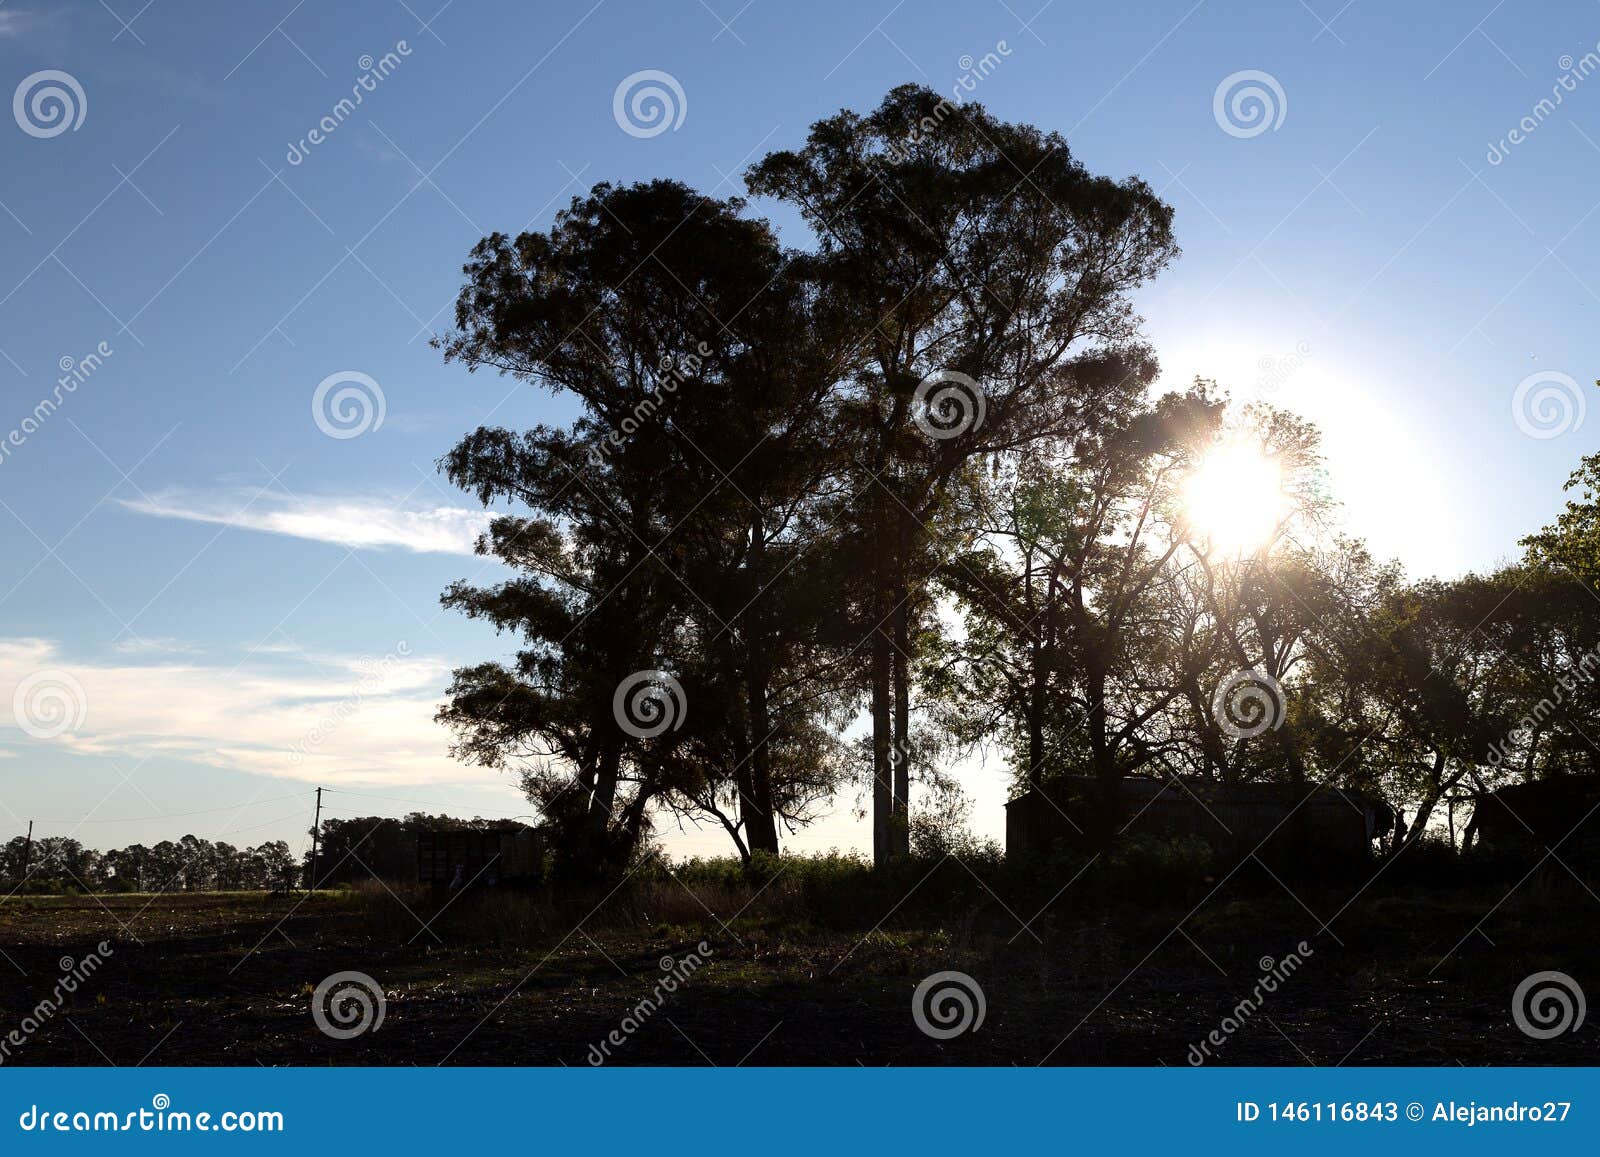 countryside landscape. in argentina, near junin town.